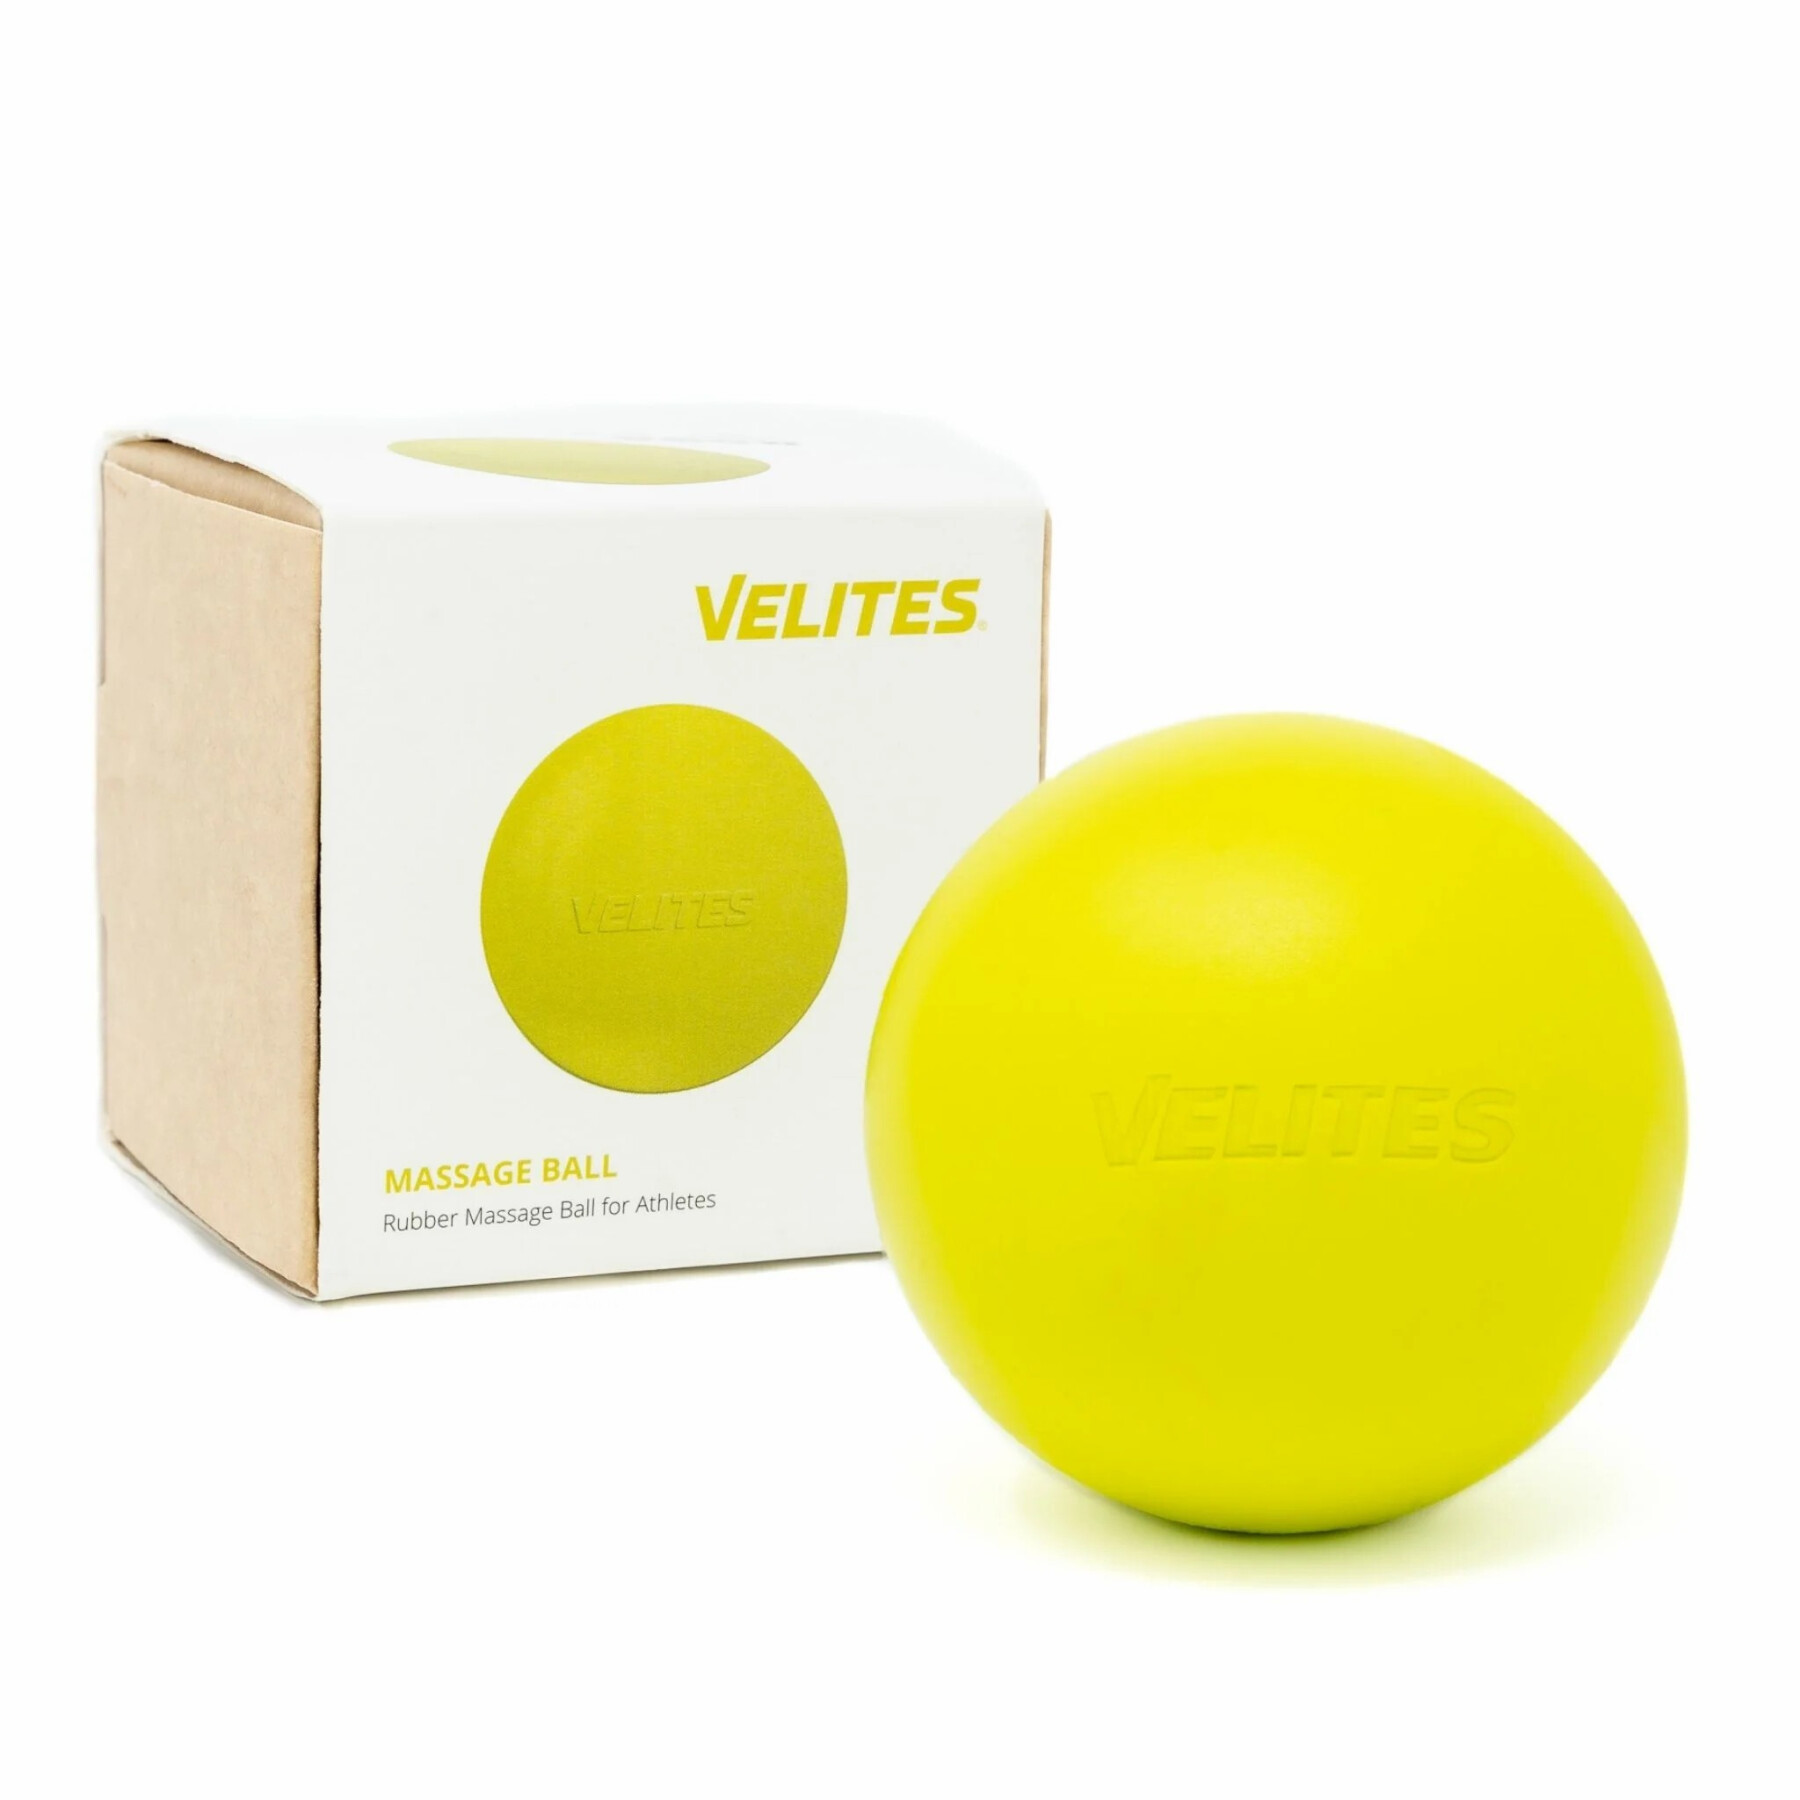 Lacrosse massage and relaxation ball Velites